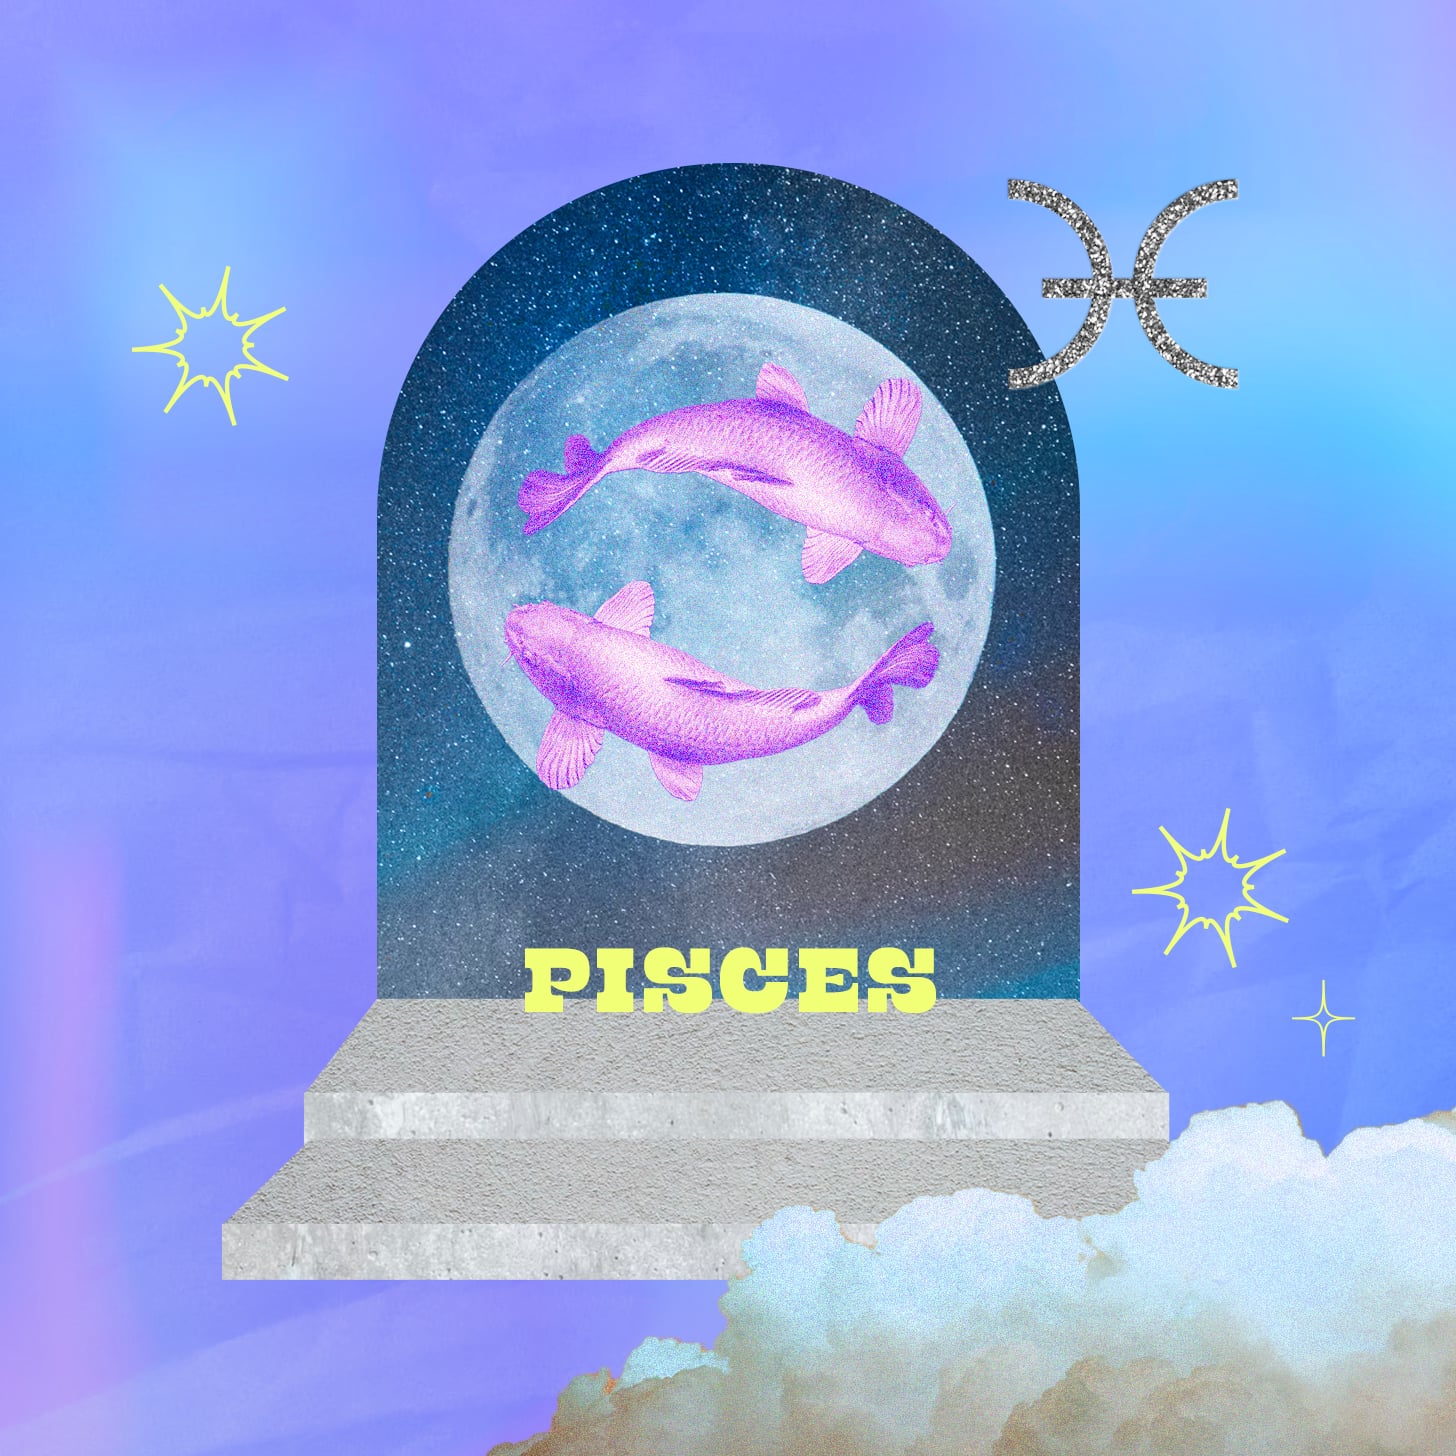 Pisces weekly horoscope for July 10, 2022